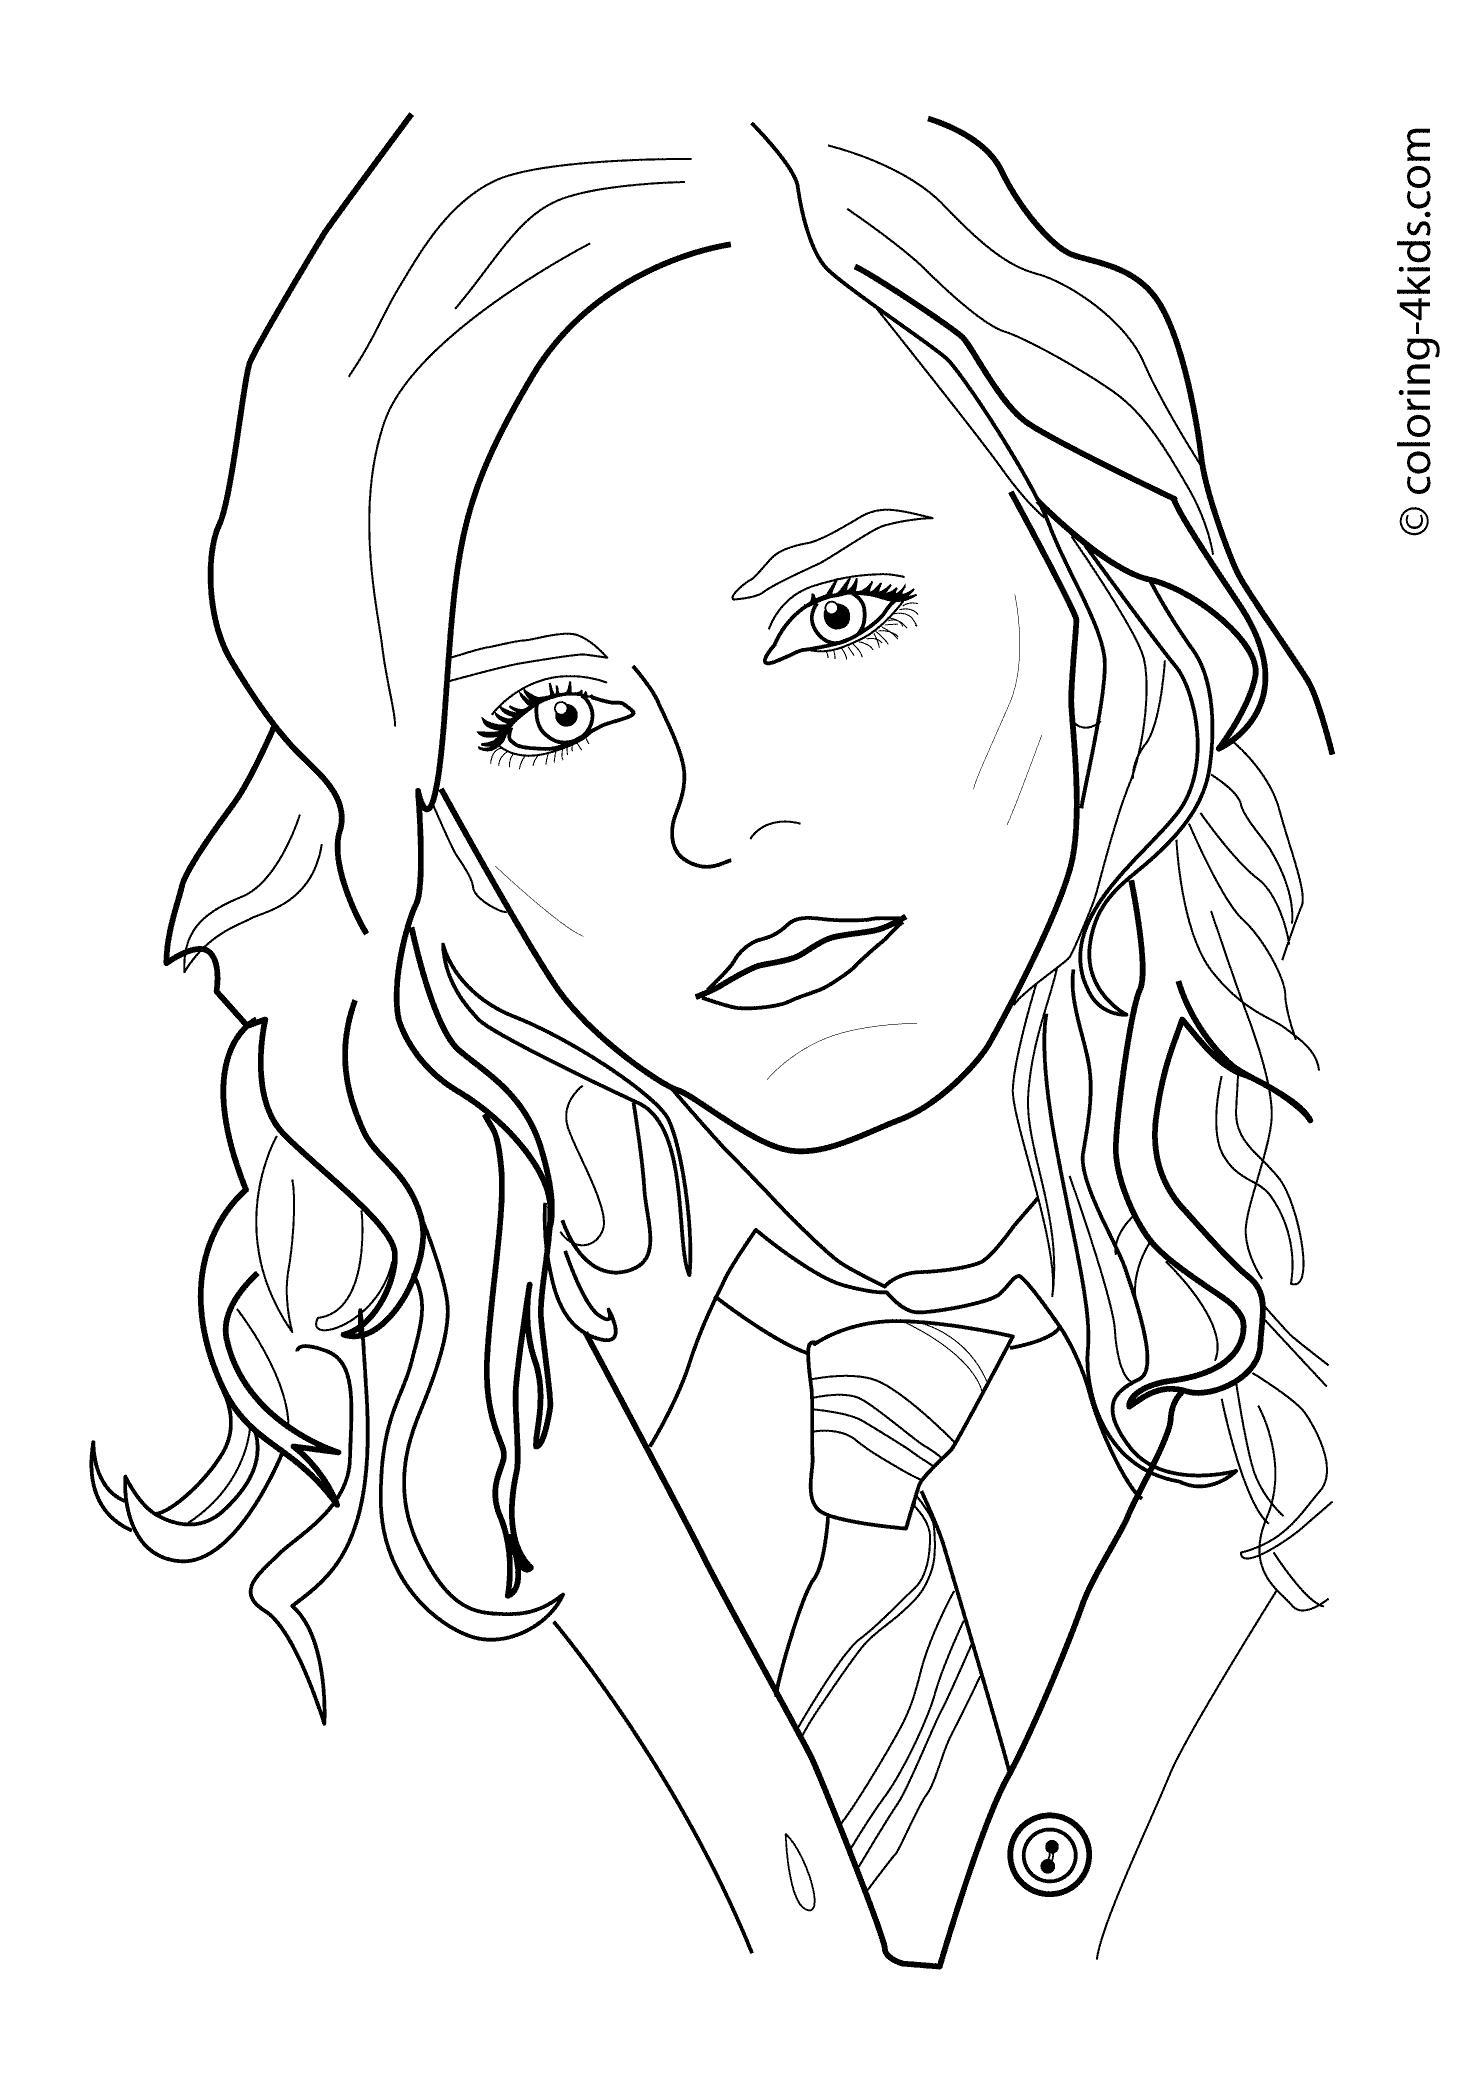 emma watson from harry potter coloring page